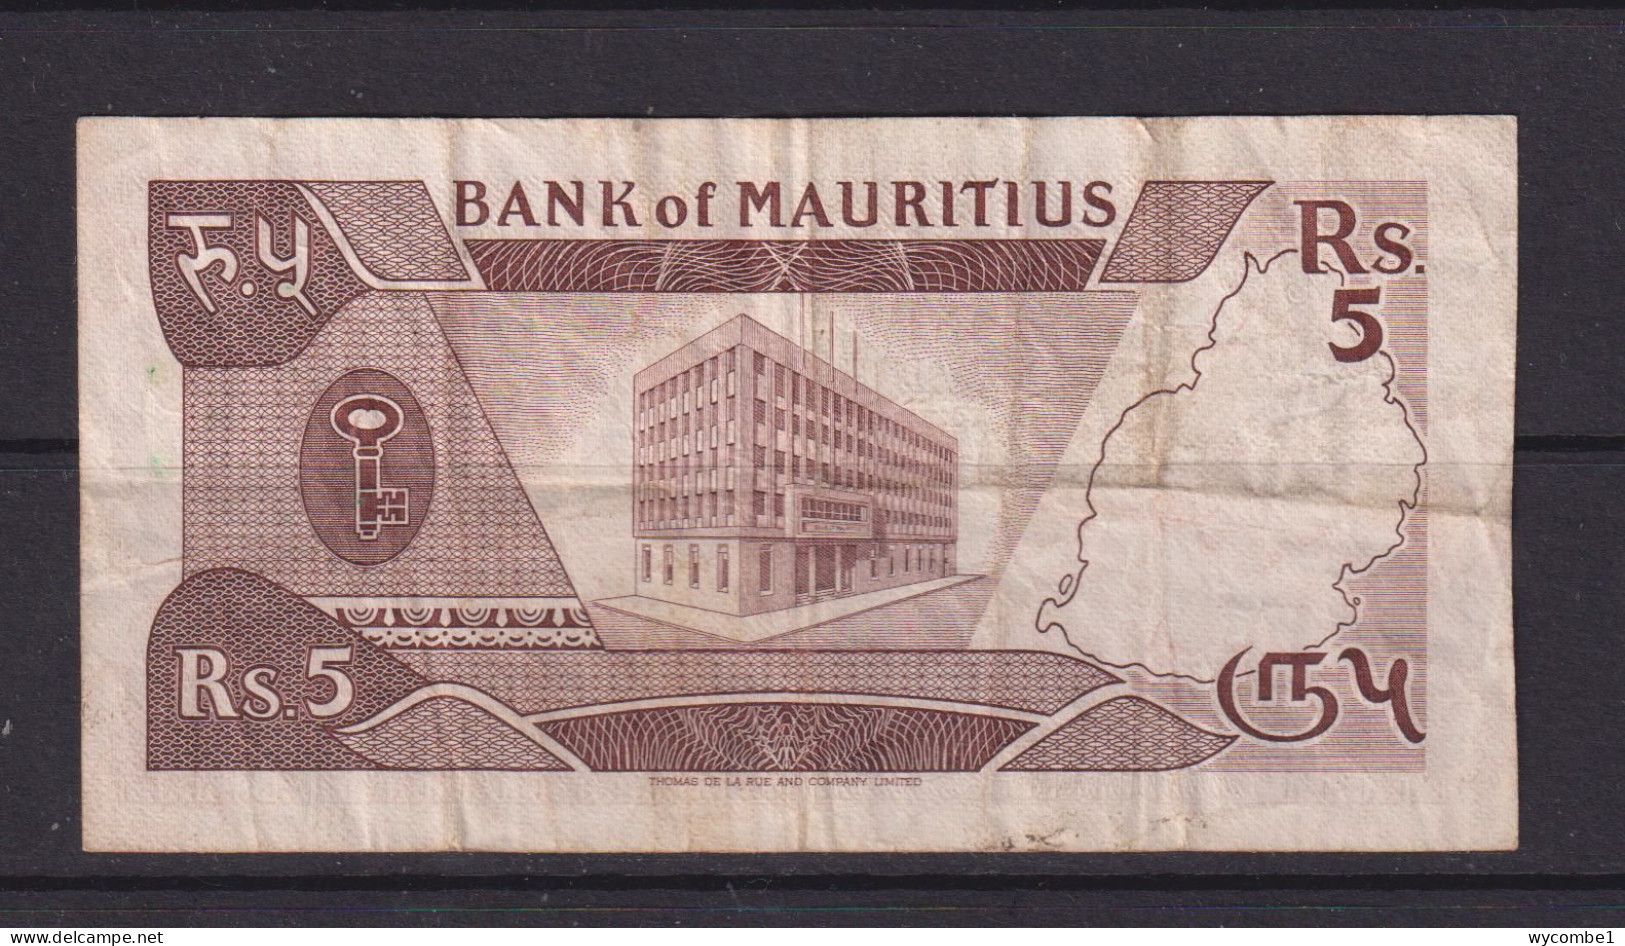 MAURITIUS -  1985 5 Rupees Circulated Banknote - Maurice